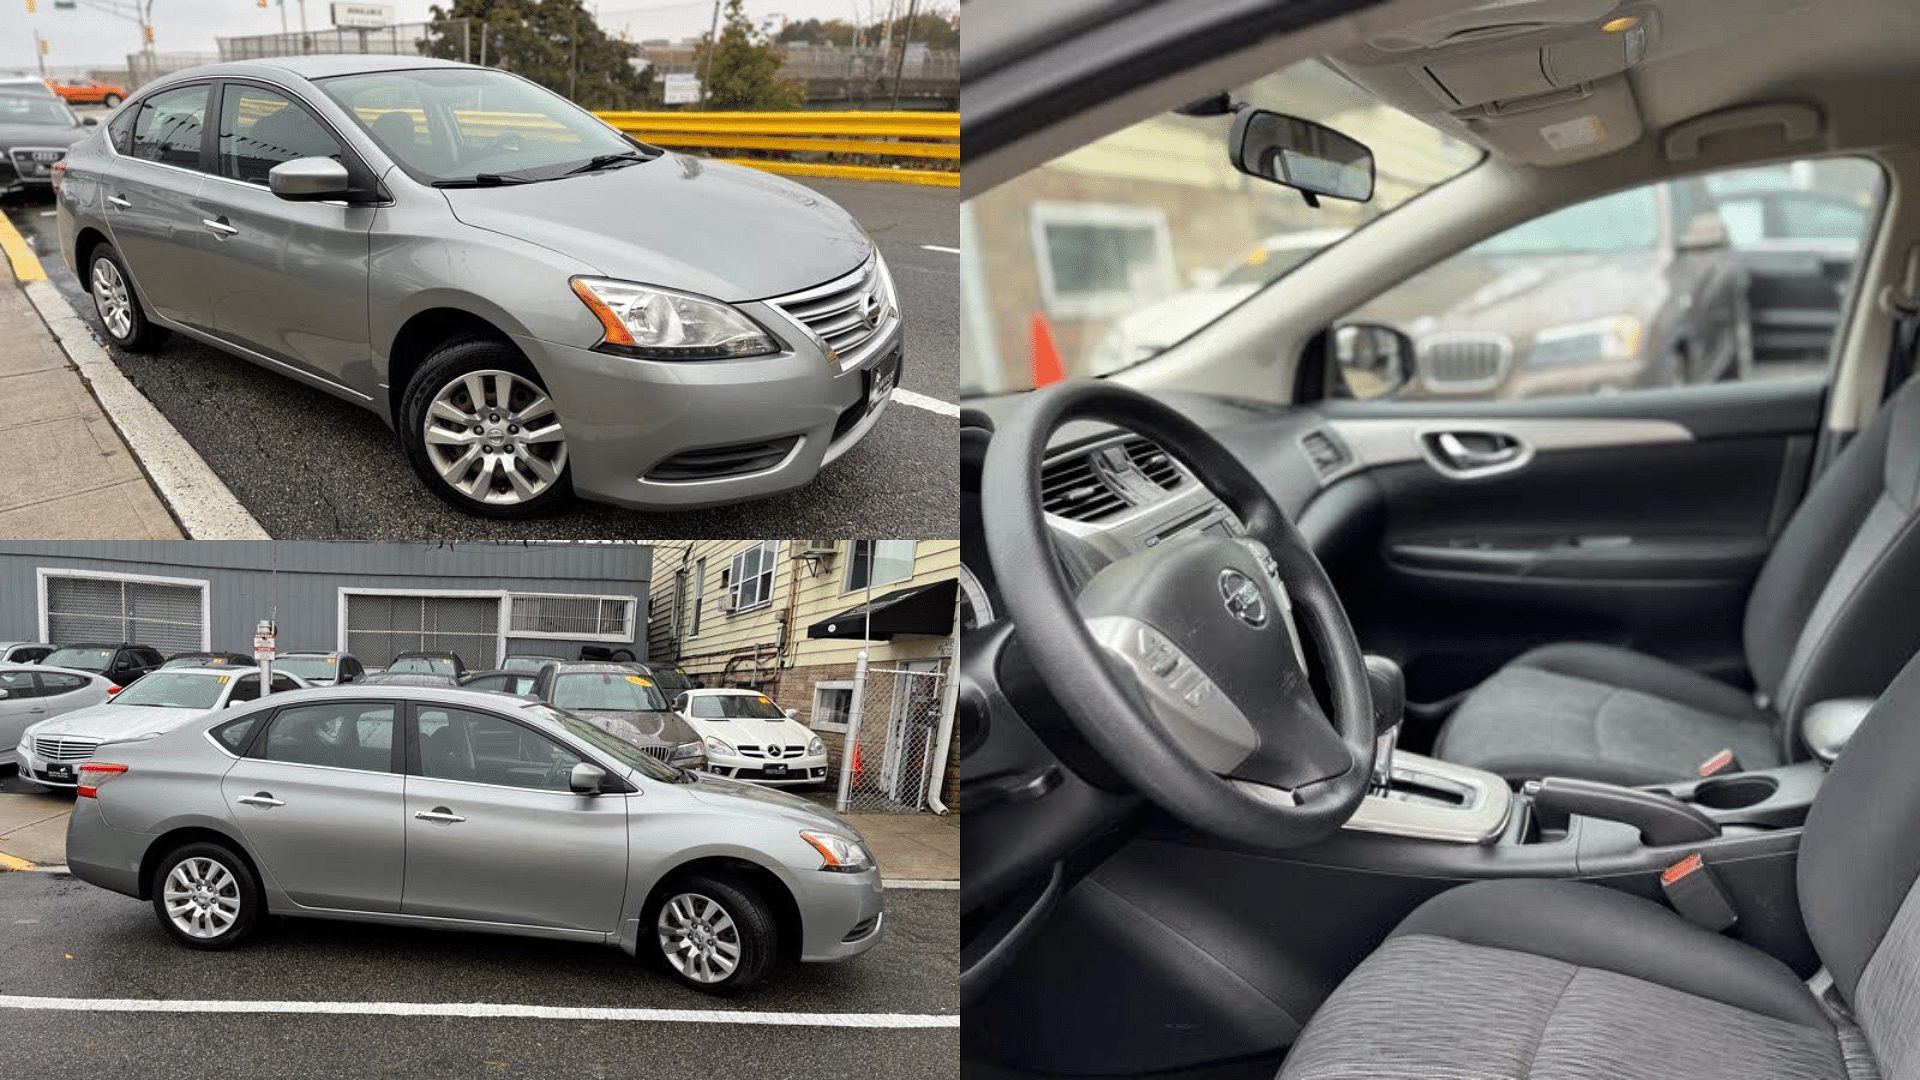 2013 Nissan Sentra - front and side view, interior